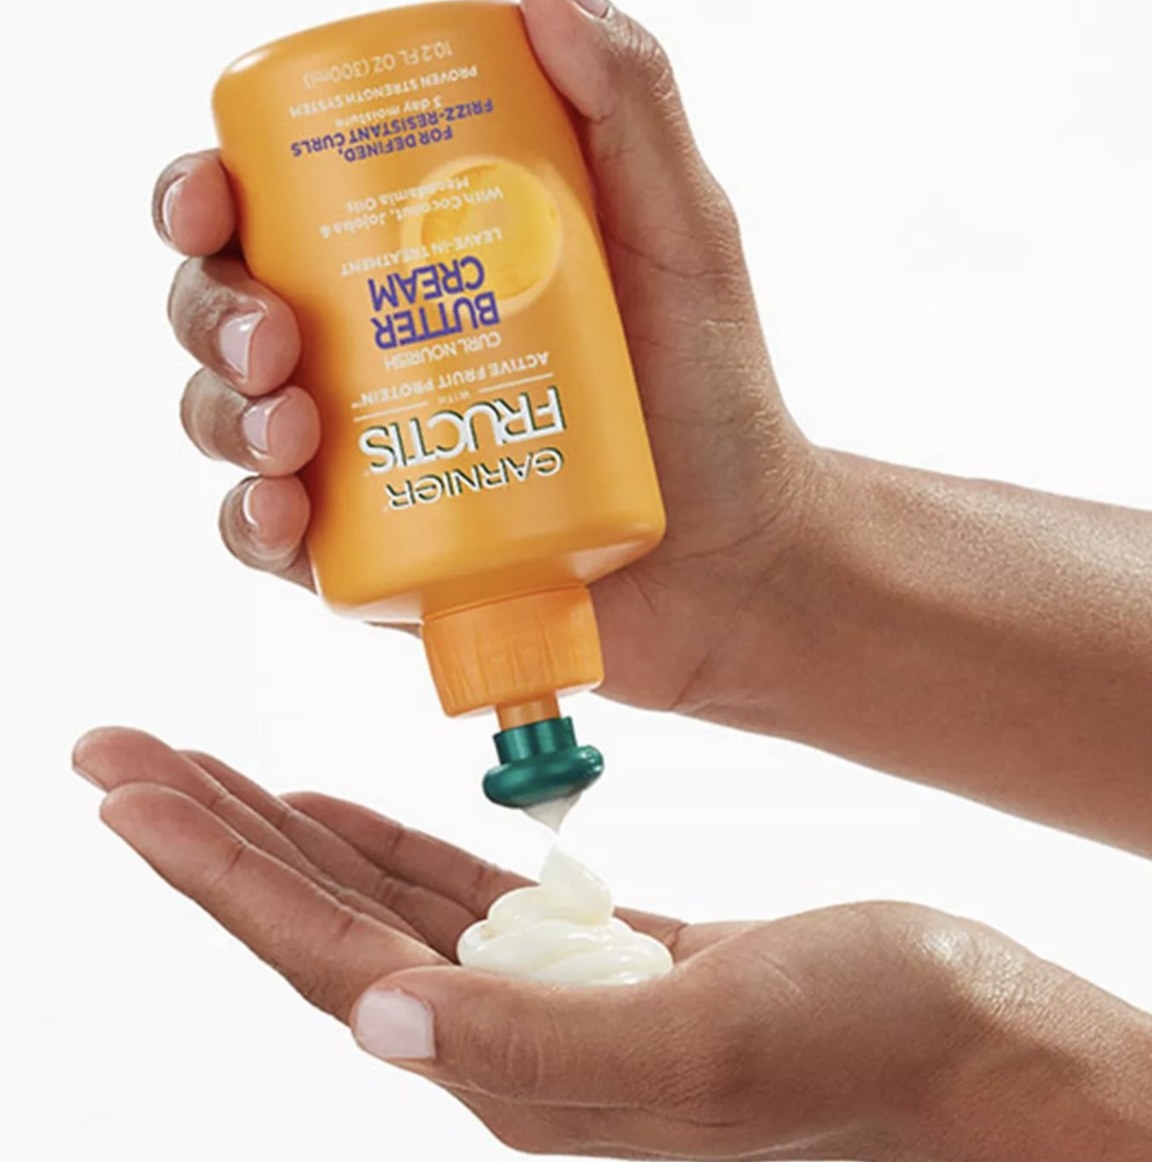 the cream being poured into someones hands